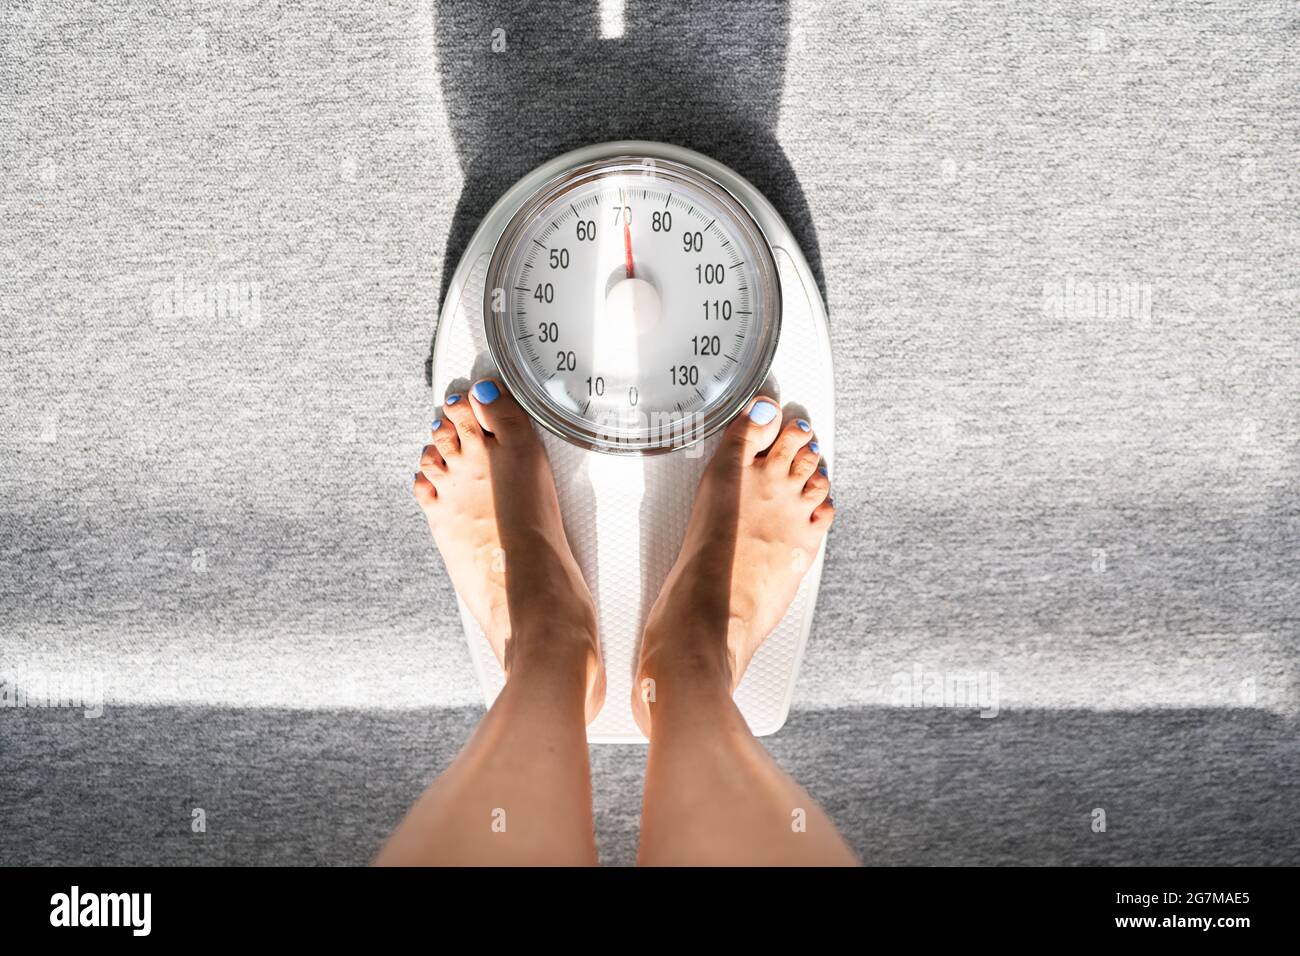 75,980 Weight Loss Scale Images, Stock Photos, 3D objects, & Vectors